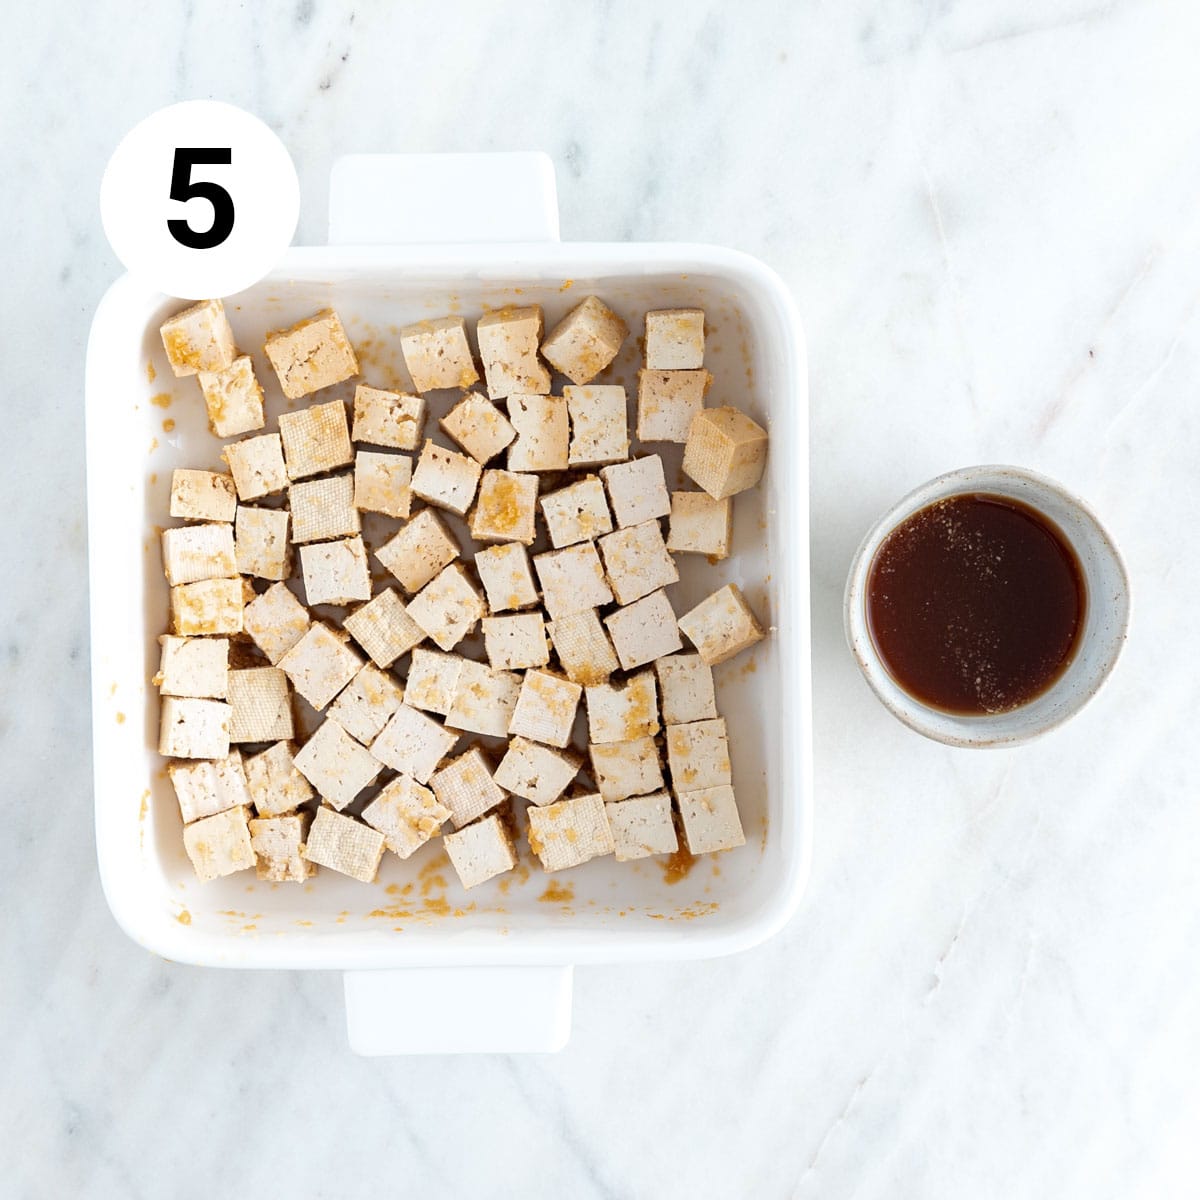 Tofu cubes in a baking dish and marinade in a bowl.